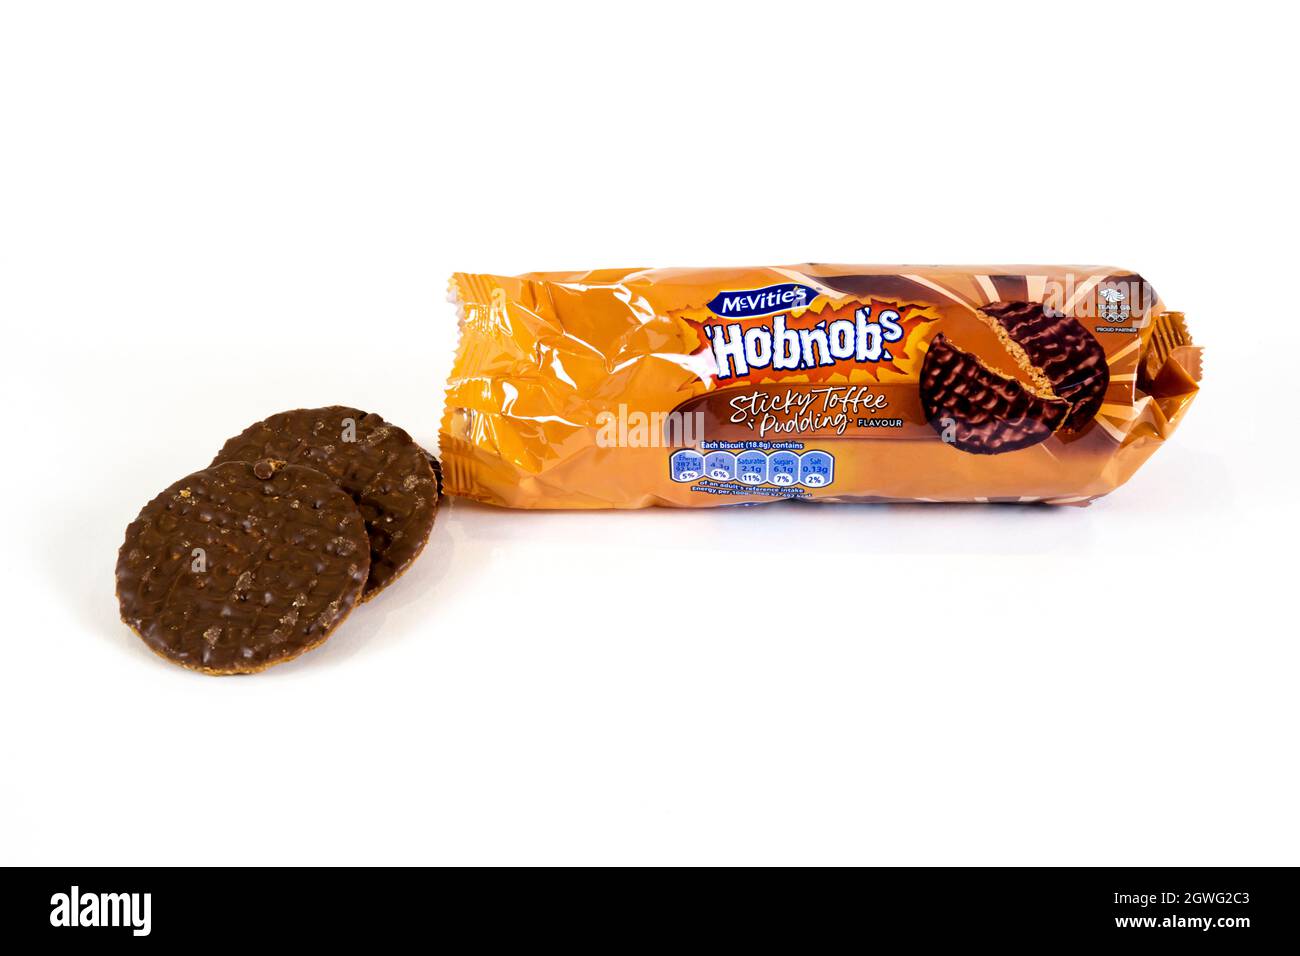 An opened packet of sticky toffee pudding flavour McVities Hobnobs biscuits with two biscuits next to the packet. Stock Photo